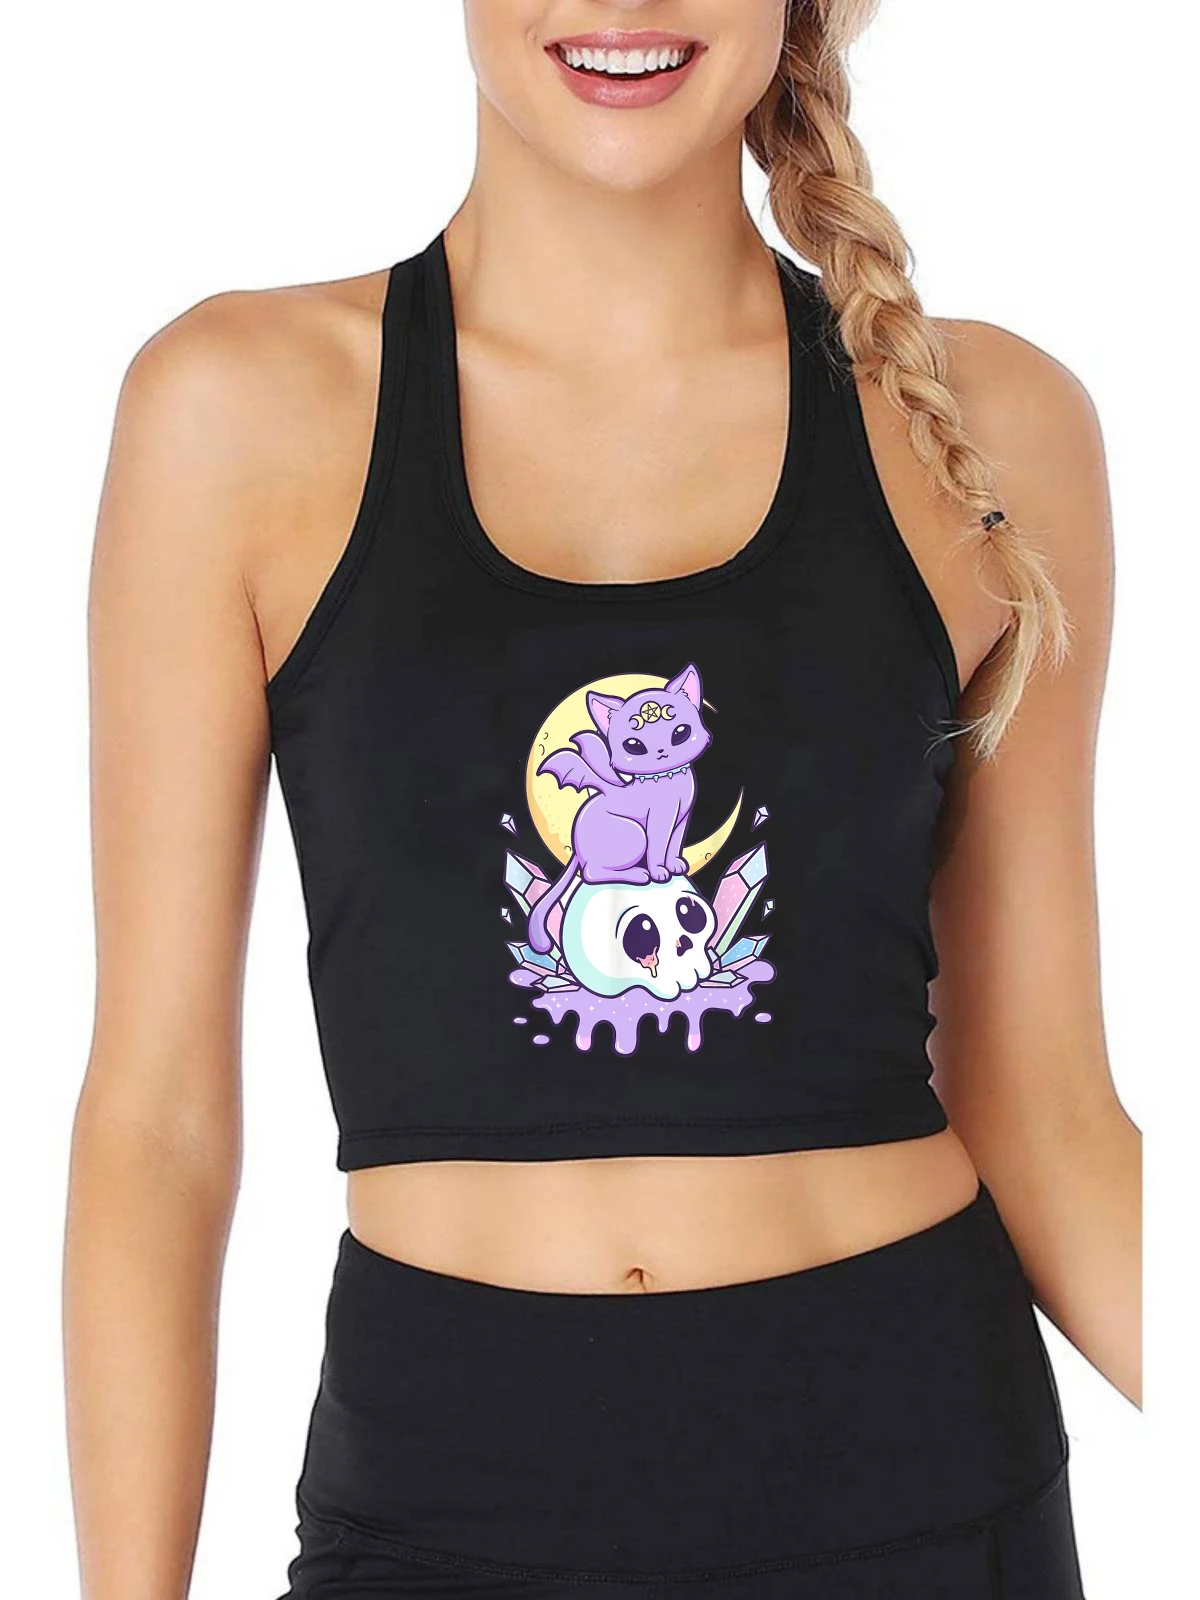 

Witchy Cat and Skull Graphics Printed Crop Top Women's Pastel Goth Cute Creepy Design Tank Tops Sexy Slim Fit Fitness Camisole